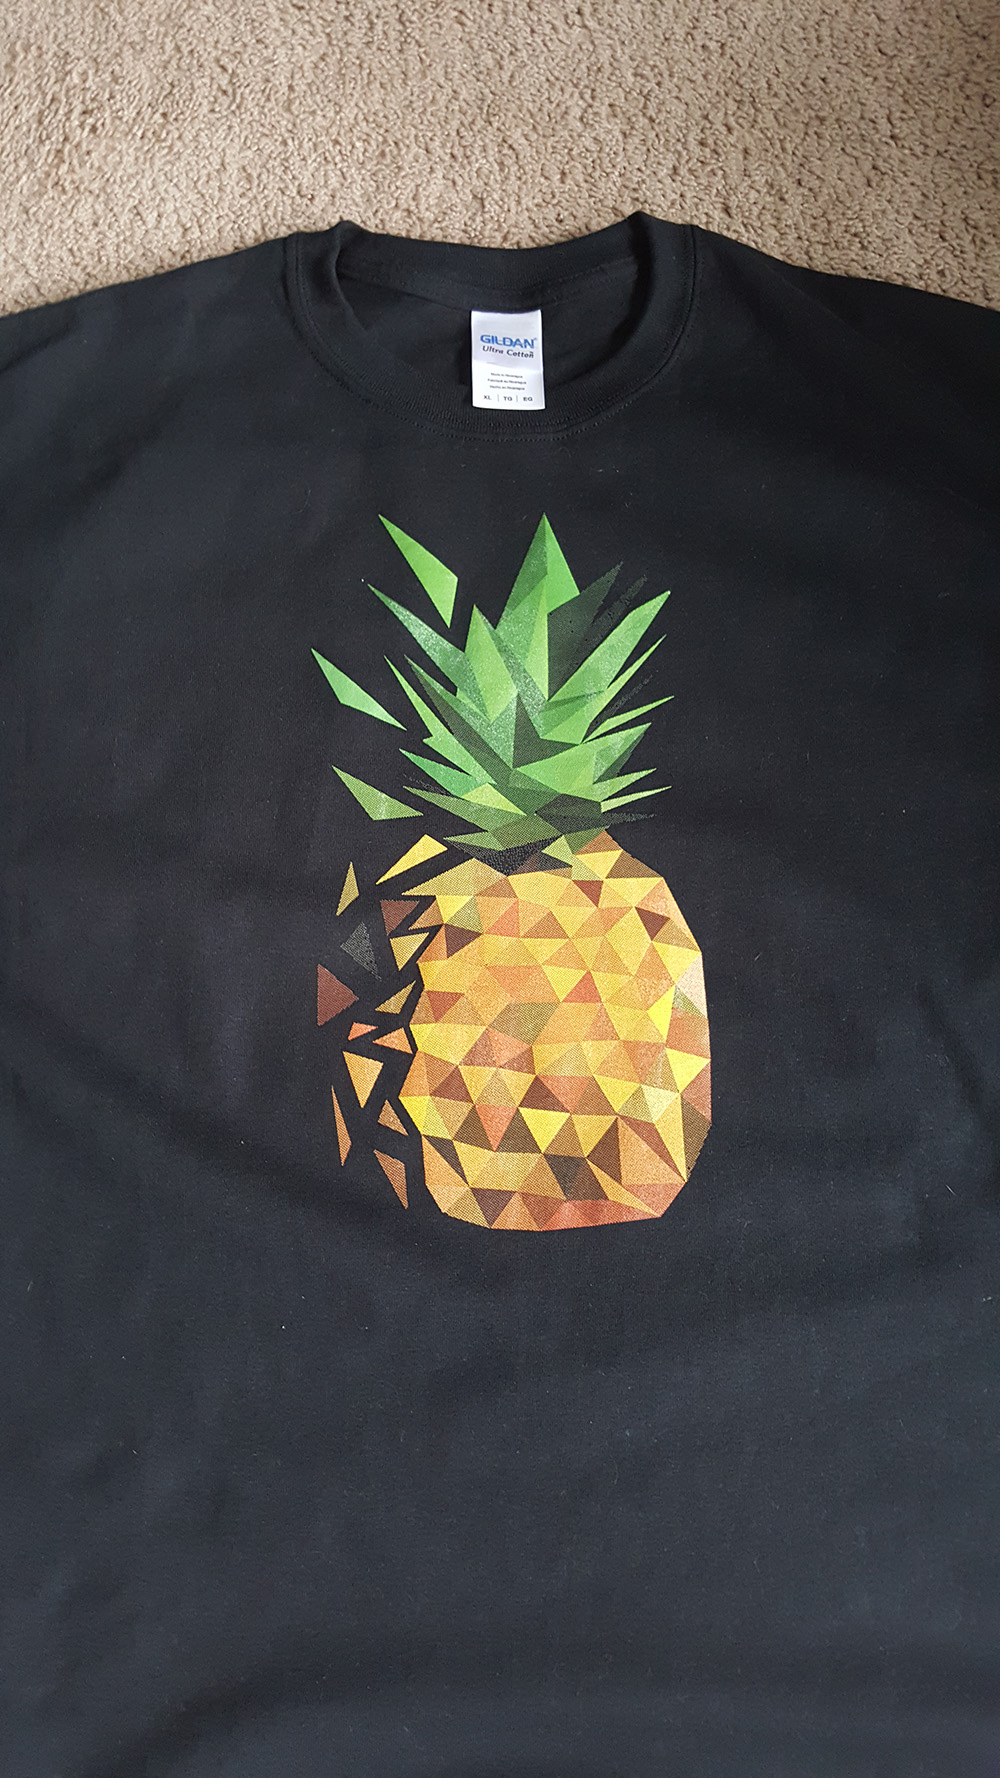 Pineapple Shirt made with sublimation printing